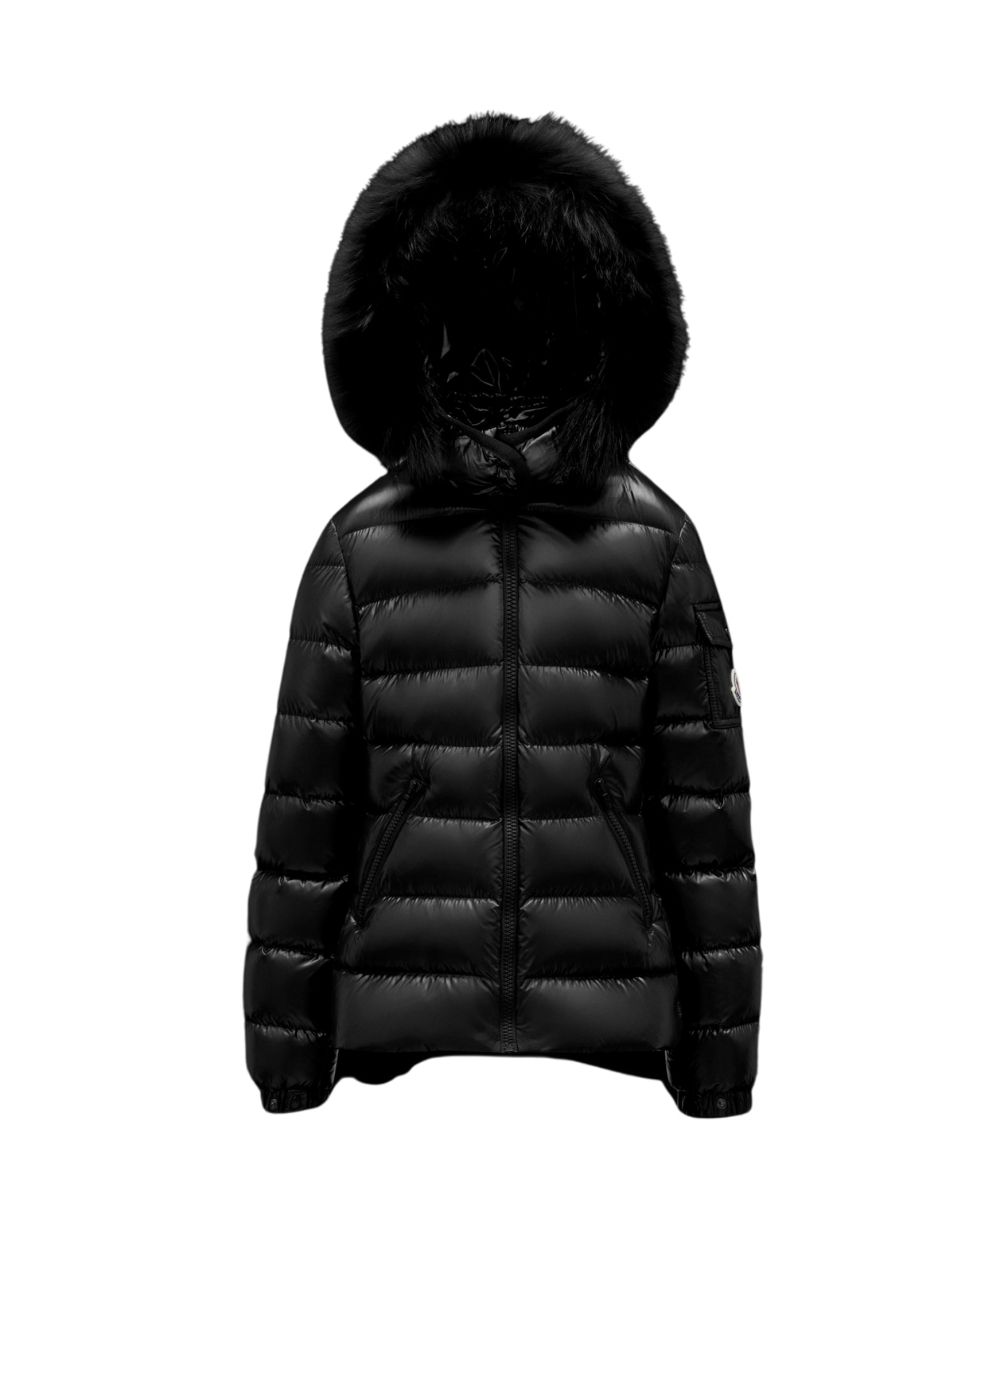 Featured image for “MONCLER BADY FUR”